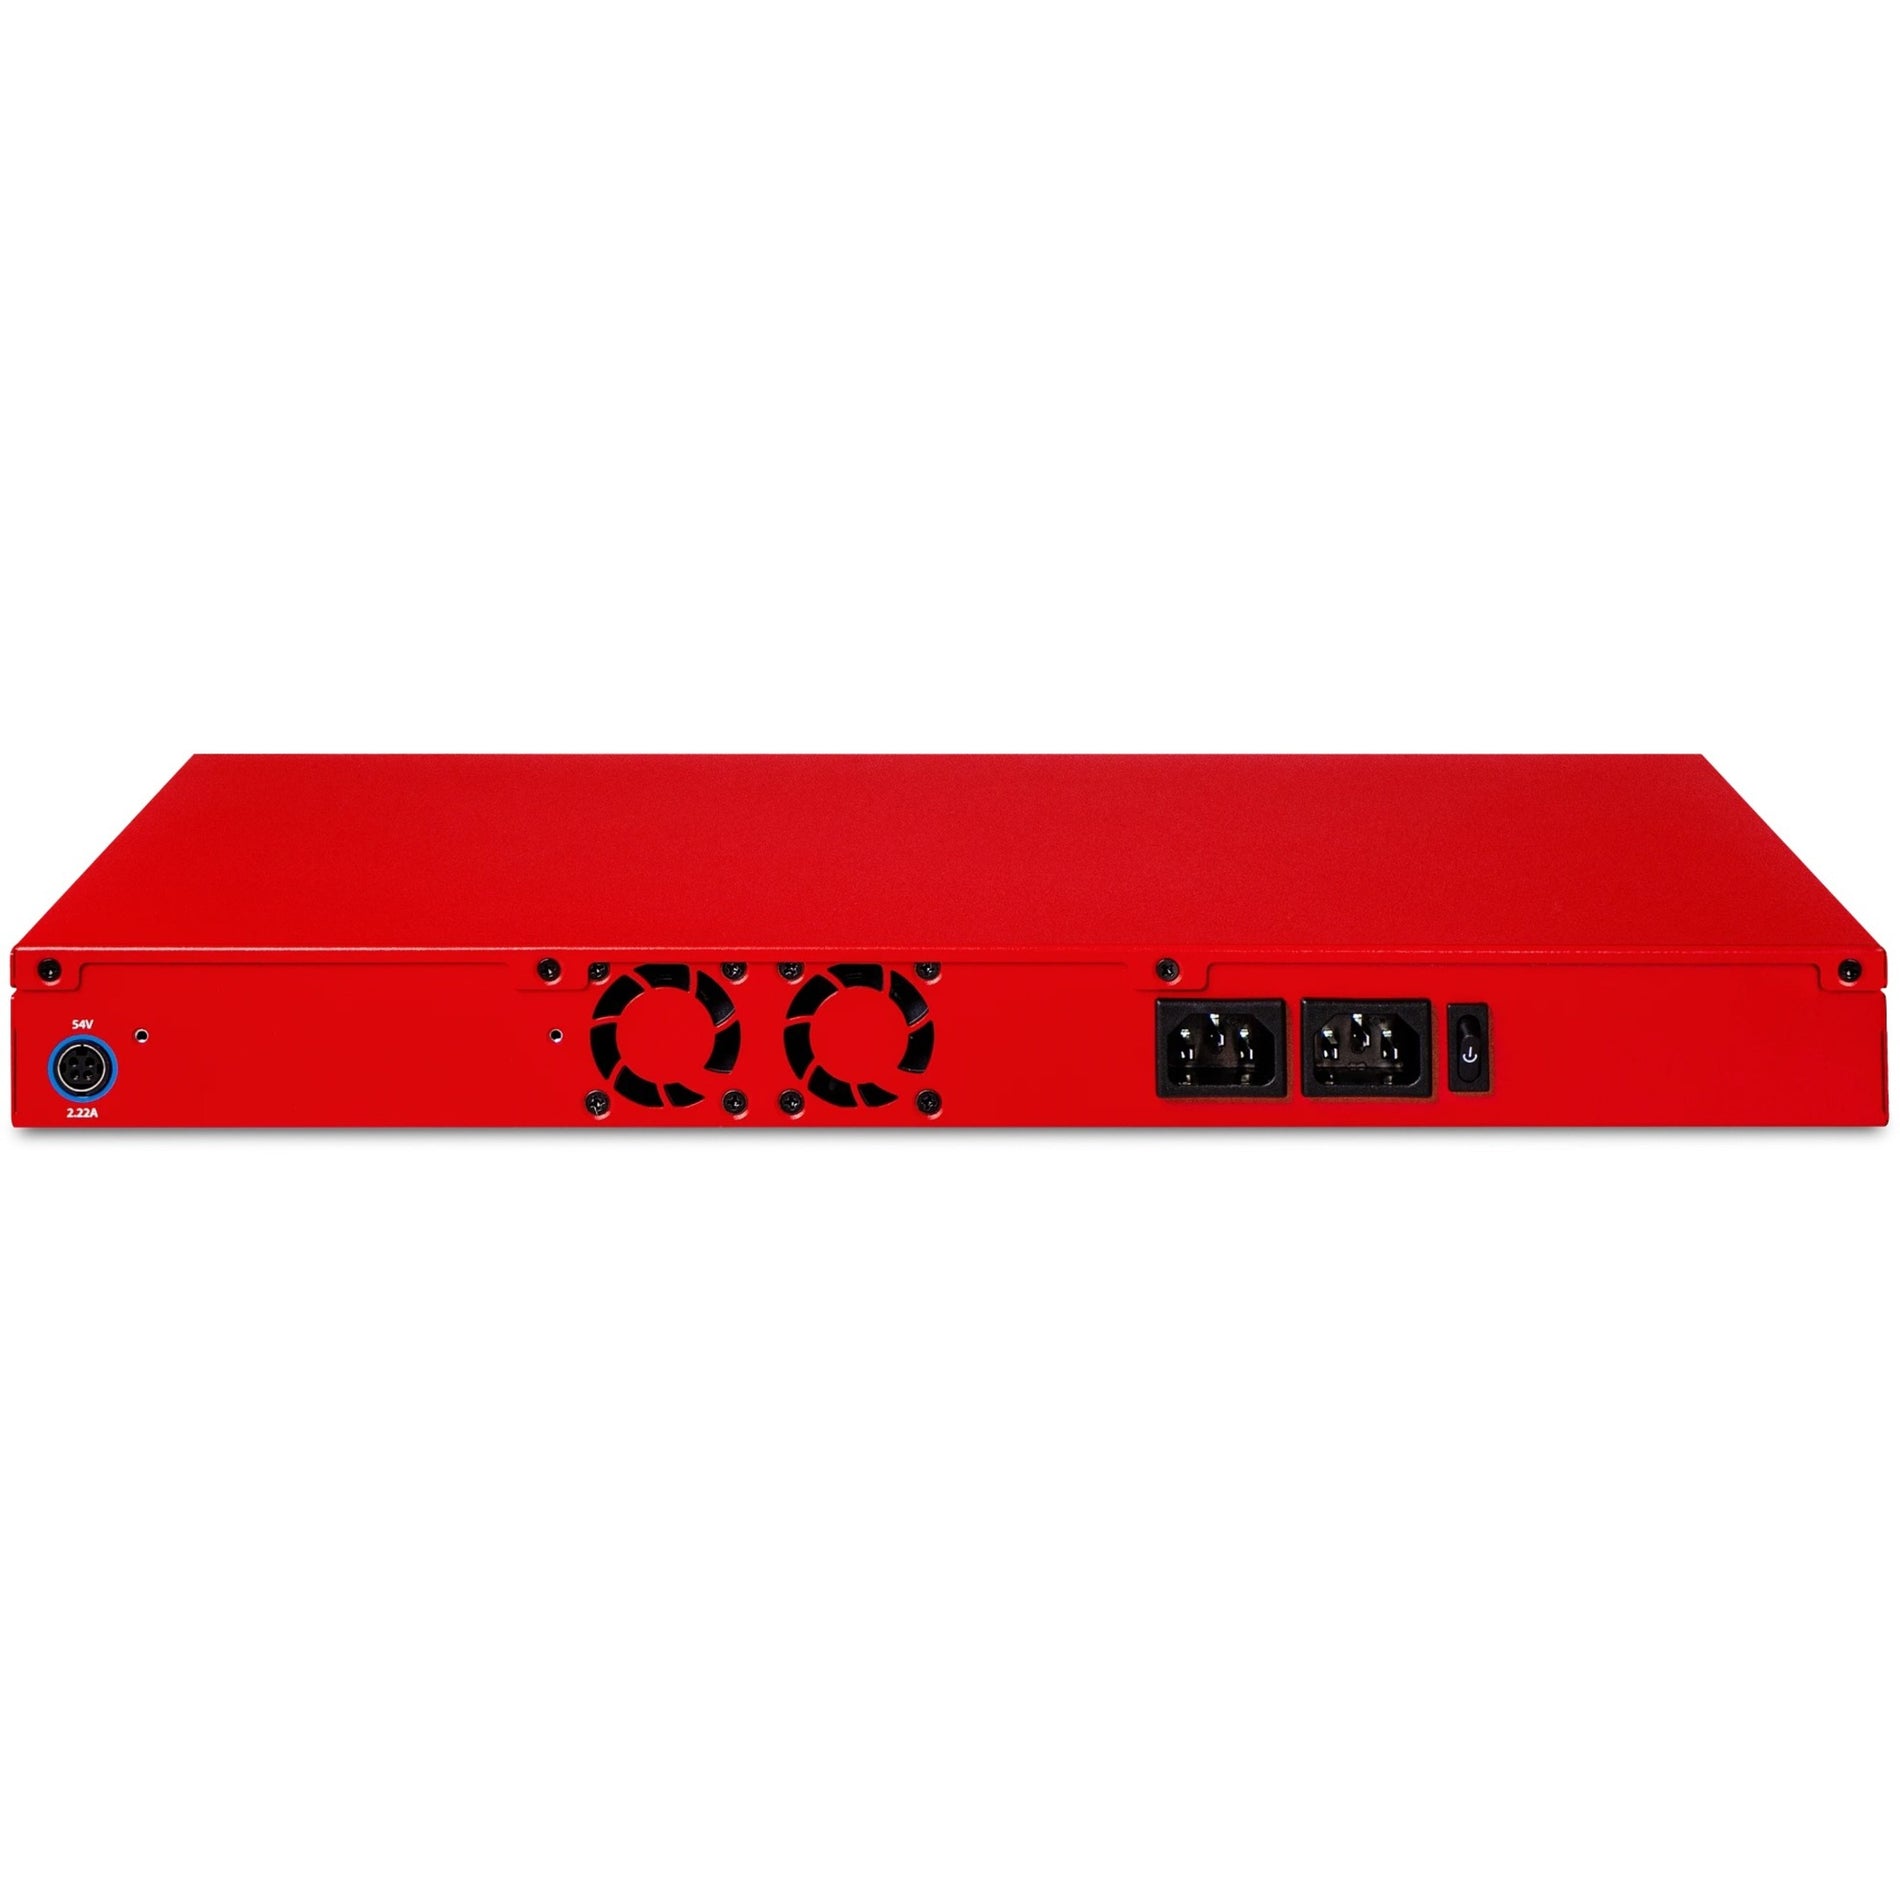 WatchGuard WGM59002101 Firebox M590 Network Security/Firewall Appliance, Total Security Suite, 8 Ports, 10 Gigabit Ethernet